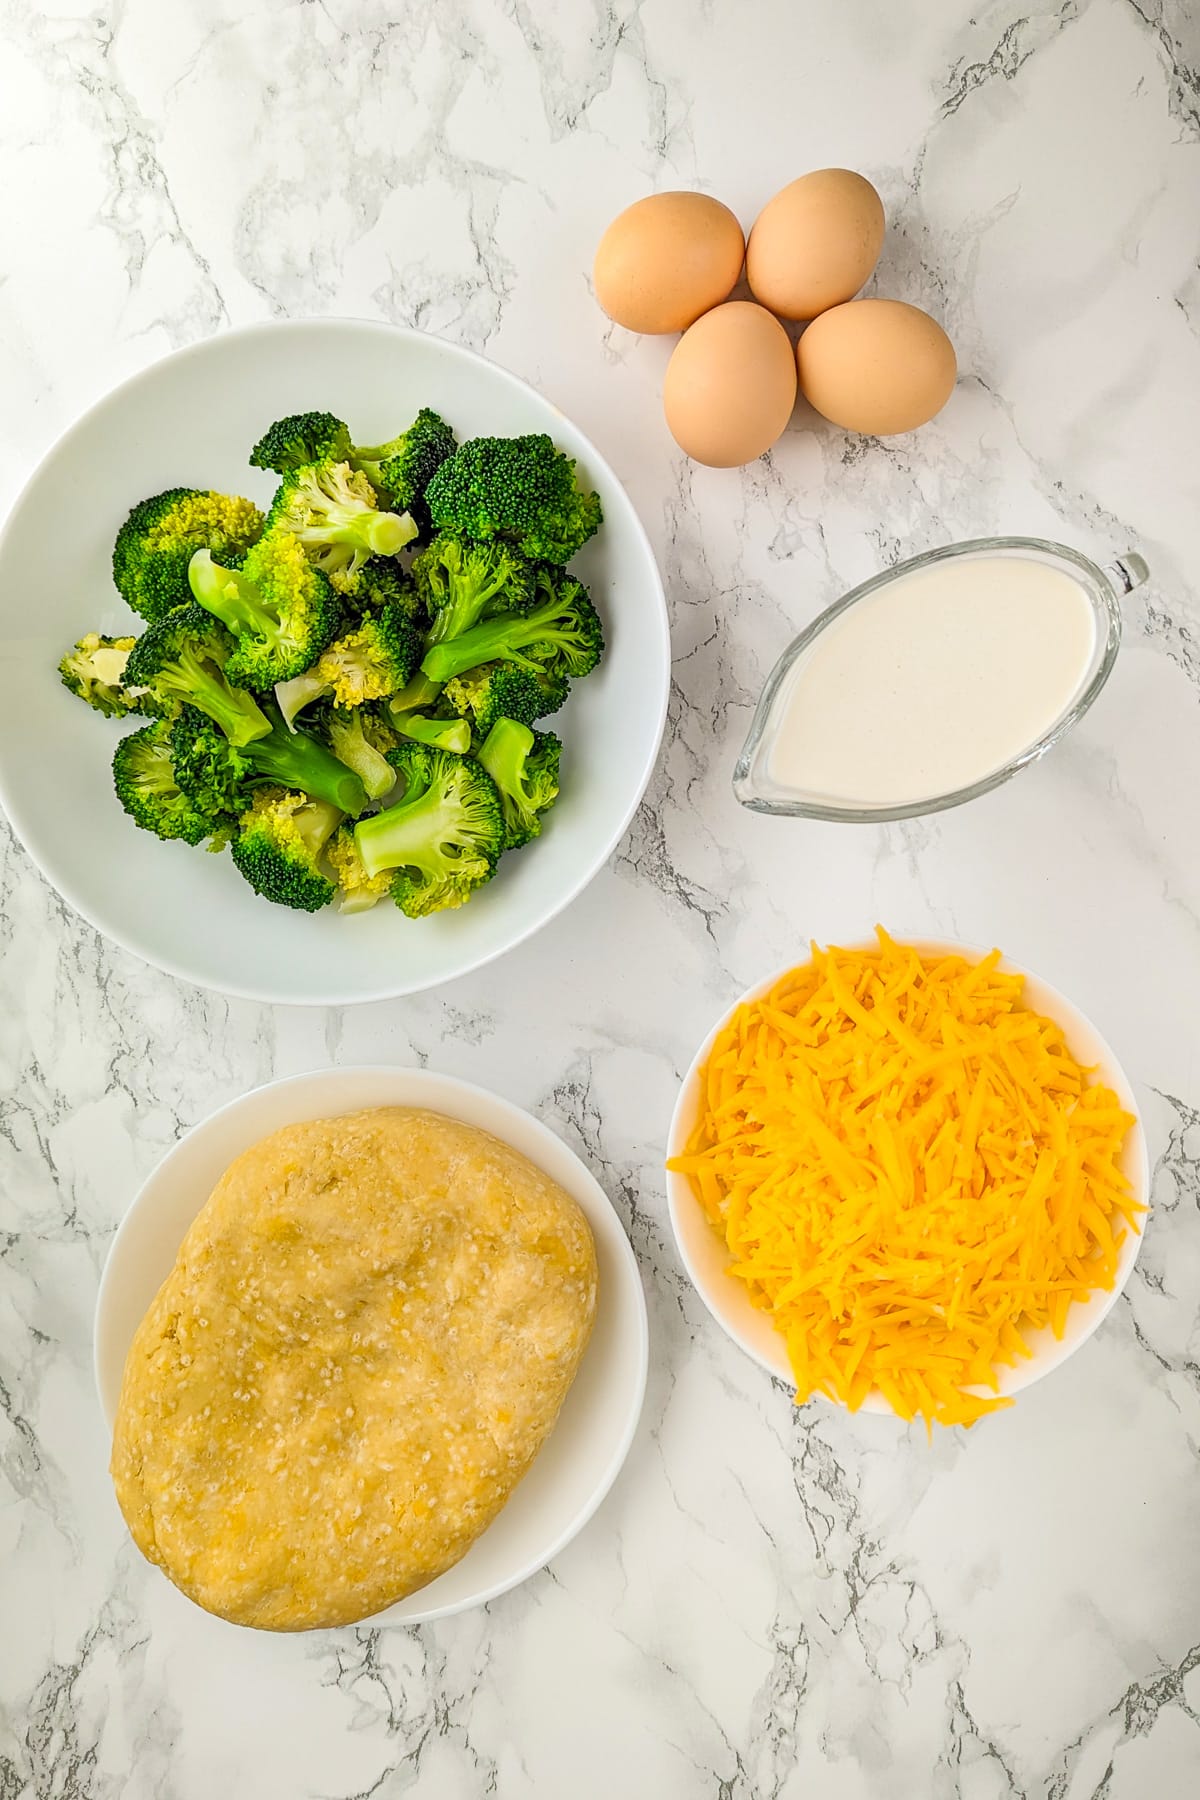 Ingredients for broccoli cheddar quiche on a marble surface, including fresh broccoli florets, shredded cheddar cheese, a dough crust, eggs, and cream.